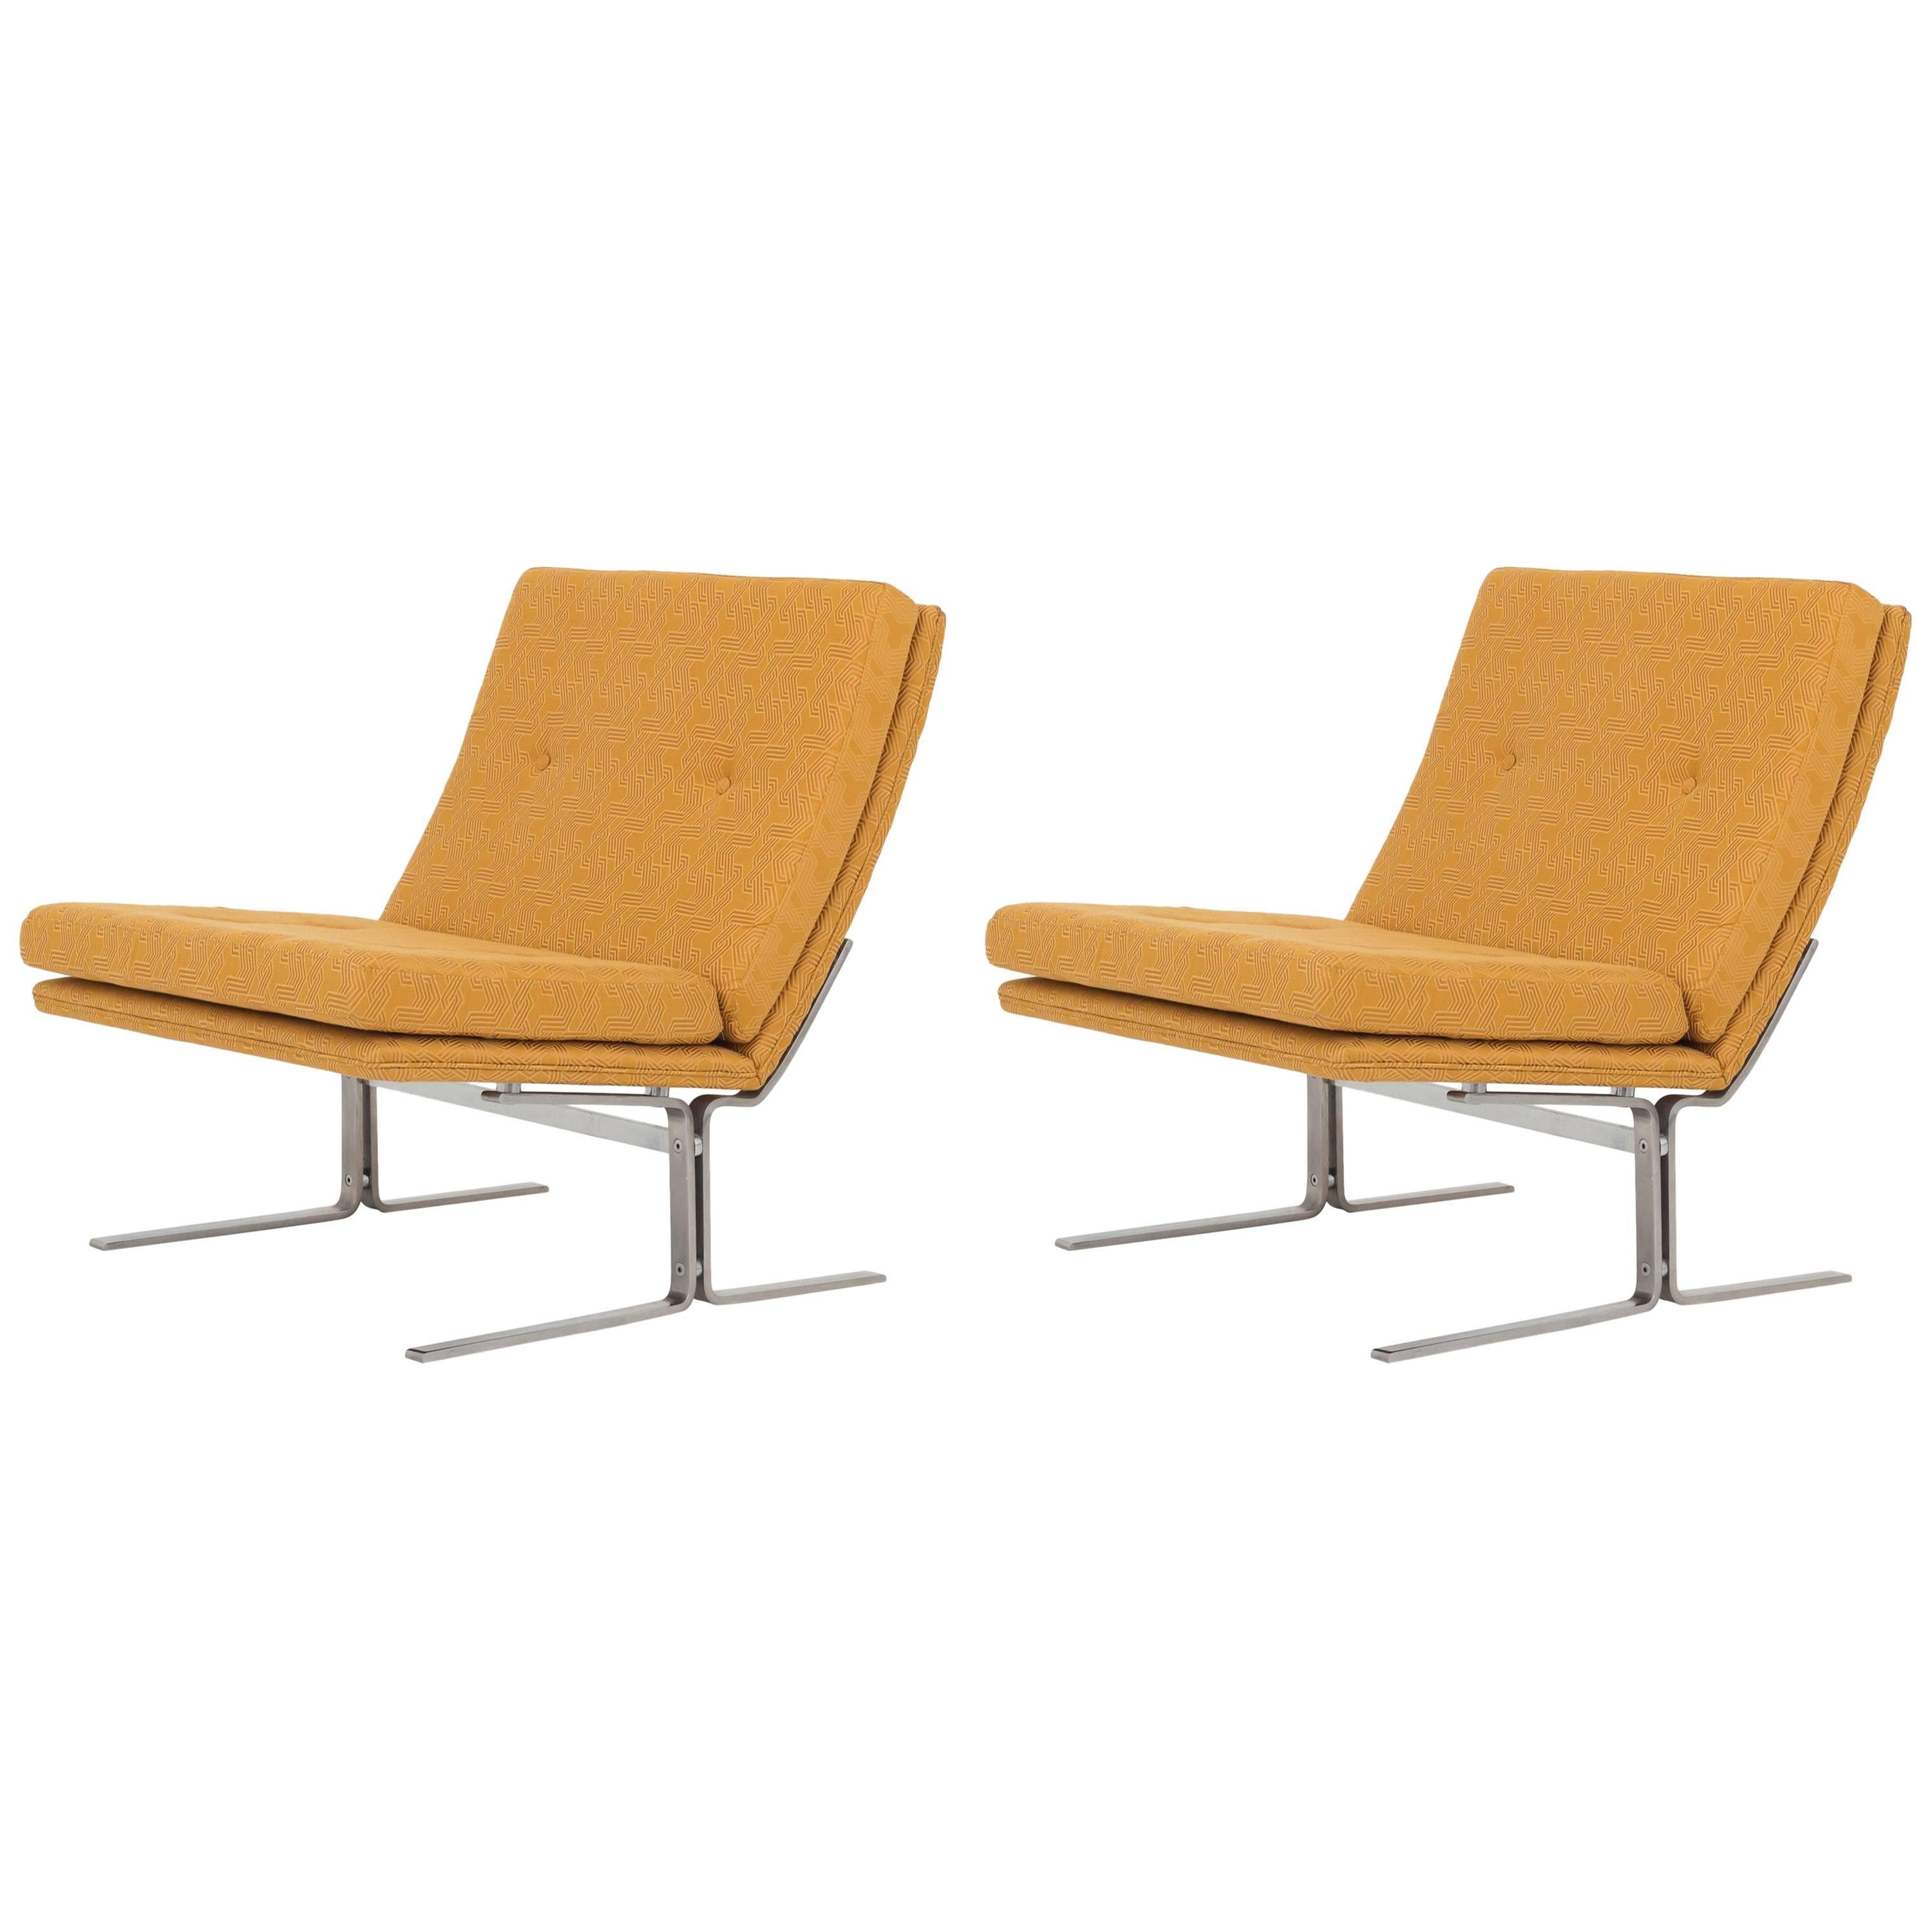 Set of Two Easychairs by Poul Nørreklit